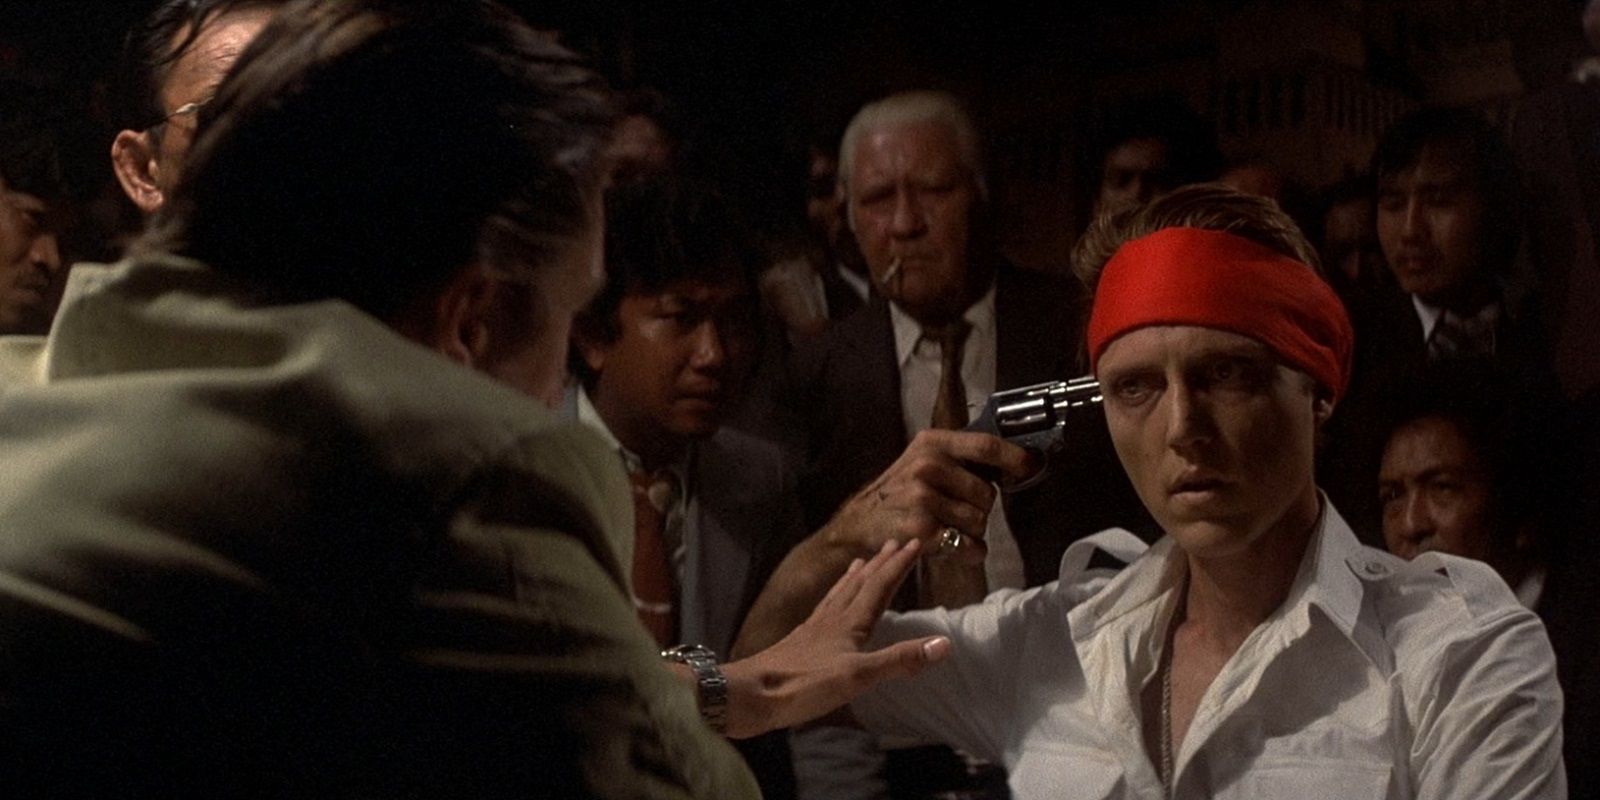 Christopher Walken pointing a gun to his head in the Deer Hunter Russian Roulette scene